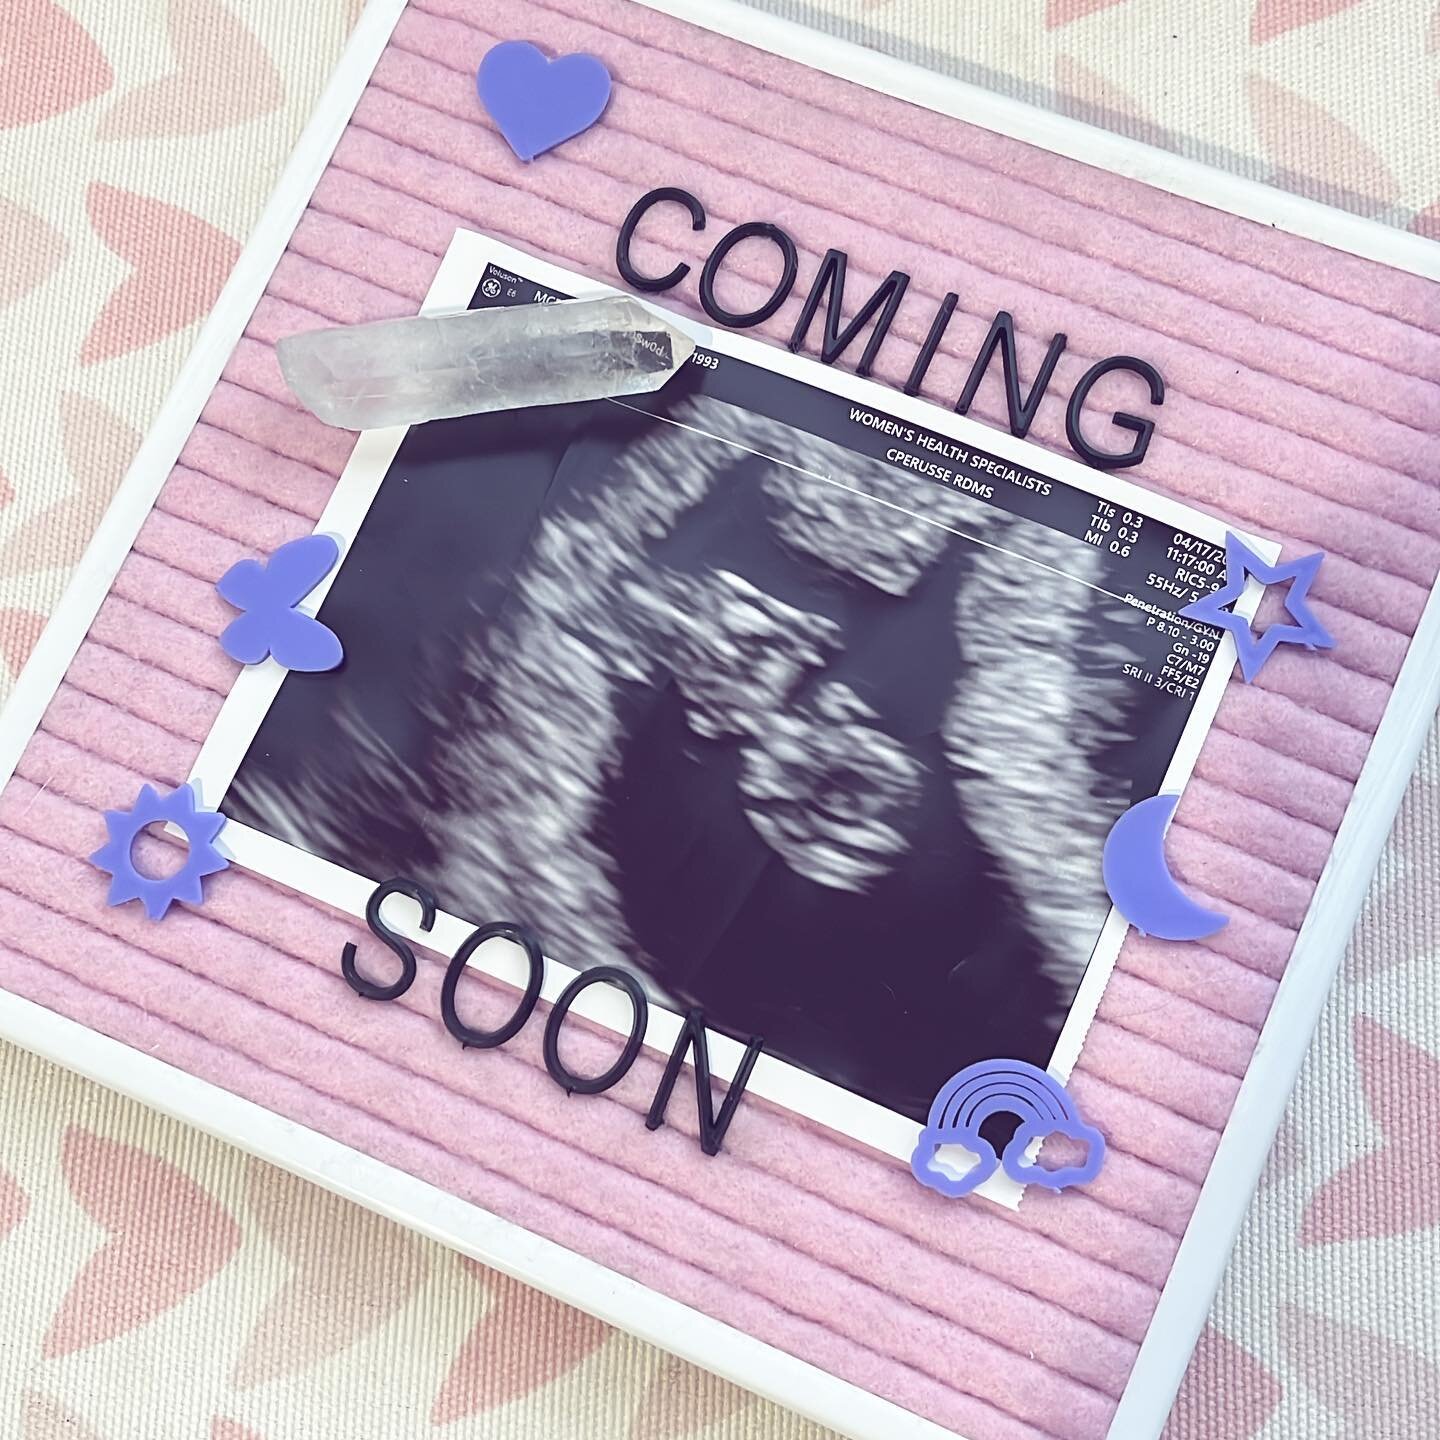 Been wanting to share this for awhile: a new lil star will be joining the castle in November! 😍✨
.
.
.
.
.
.
.
.
.
.
.
#lightworkers #spiritualentrepreneur #spiritualentrepreneurs #lightworkersunite #mommabear